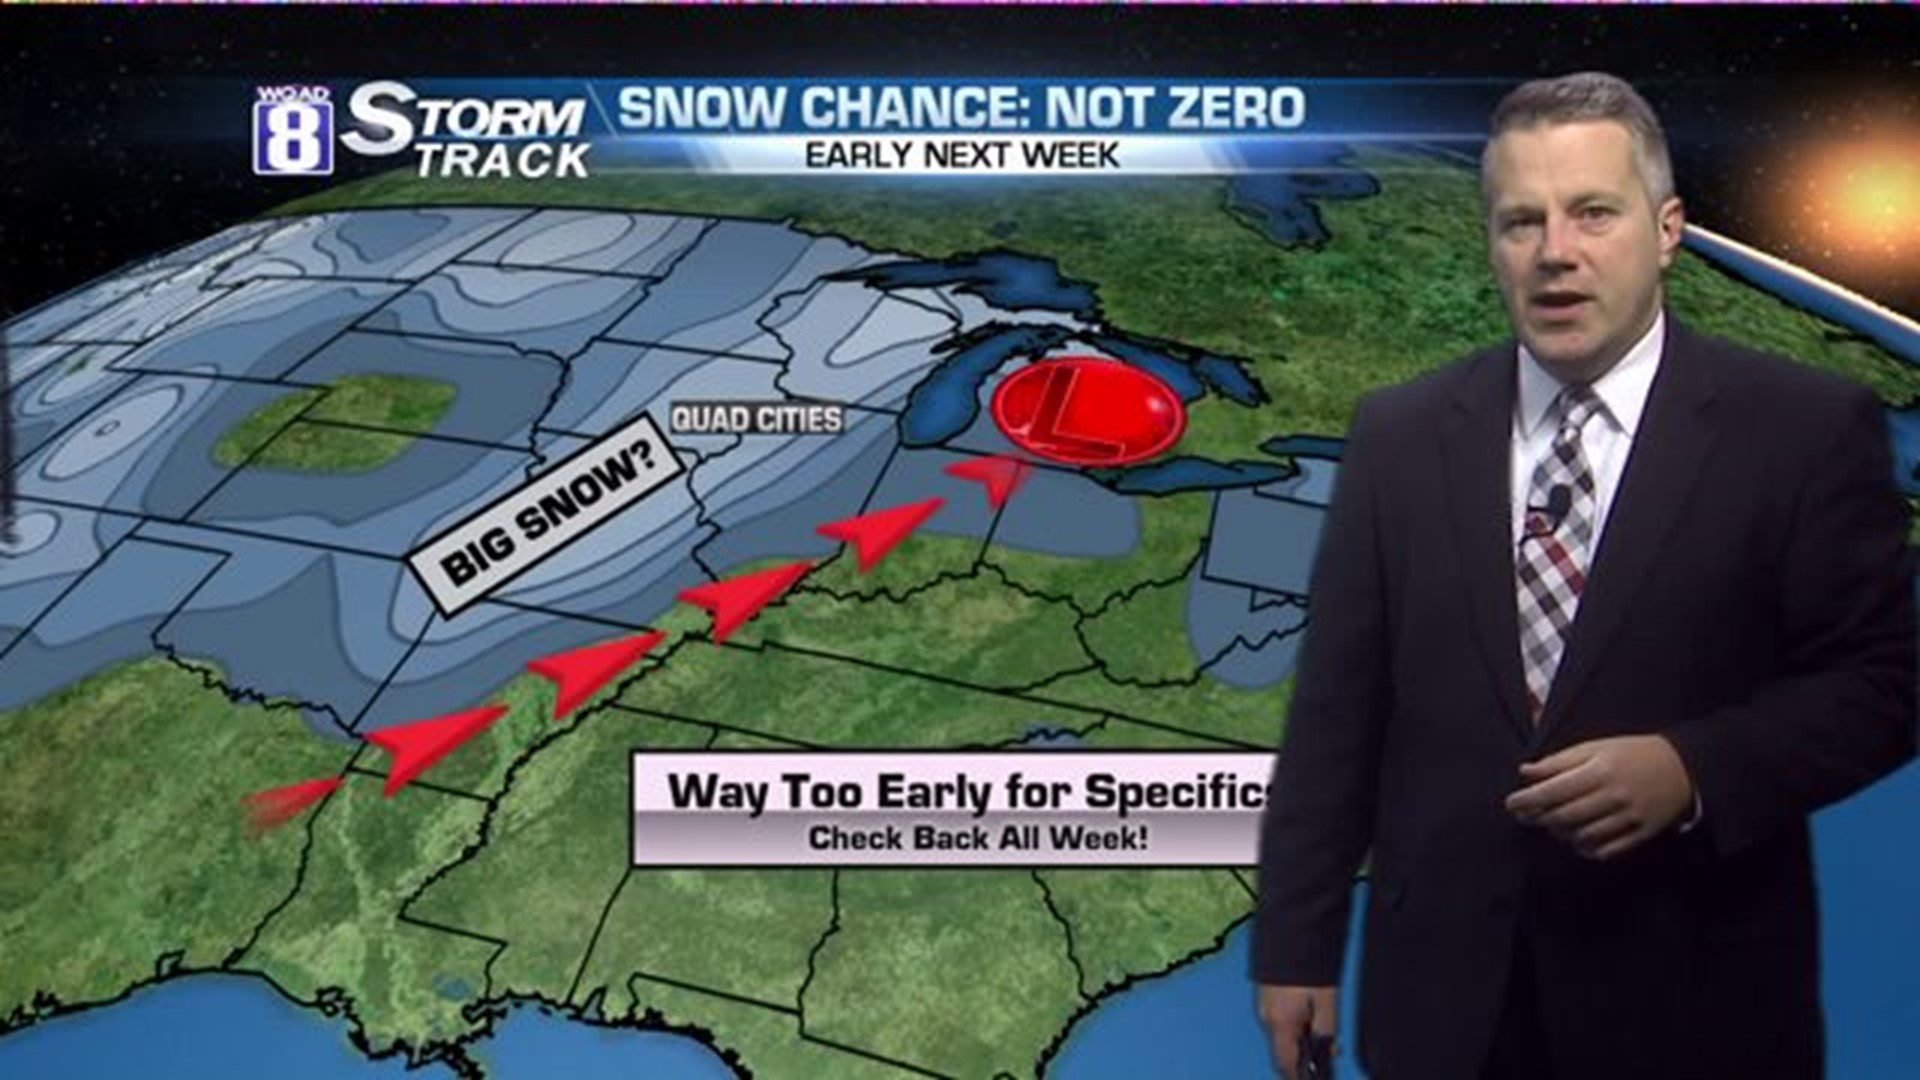 Eric shows us the chance of a snowstorm in one week